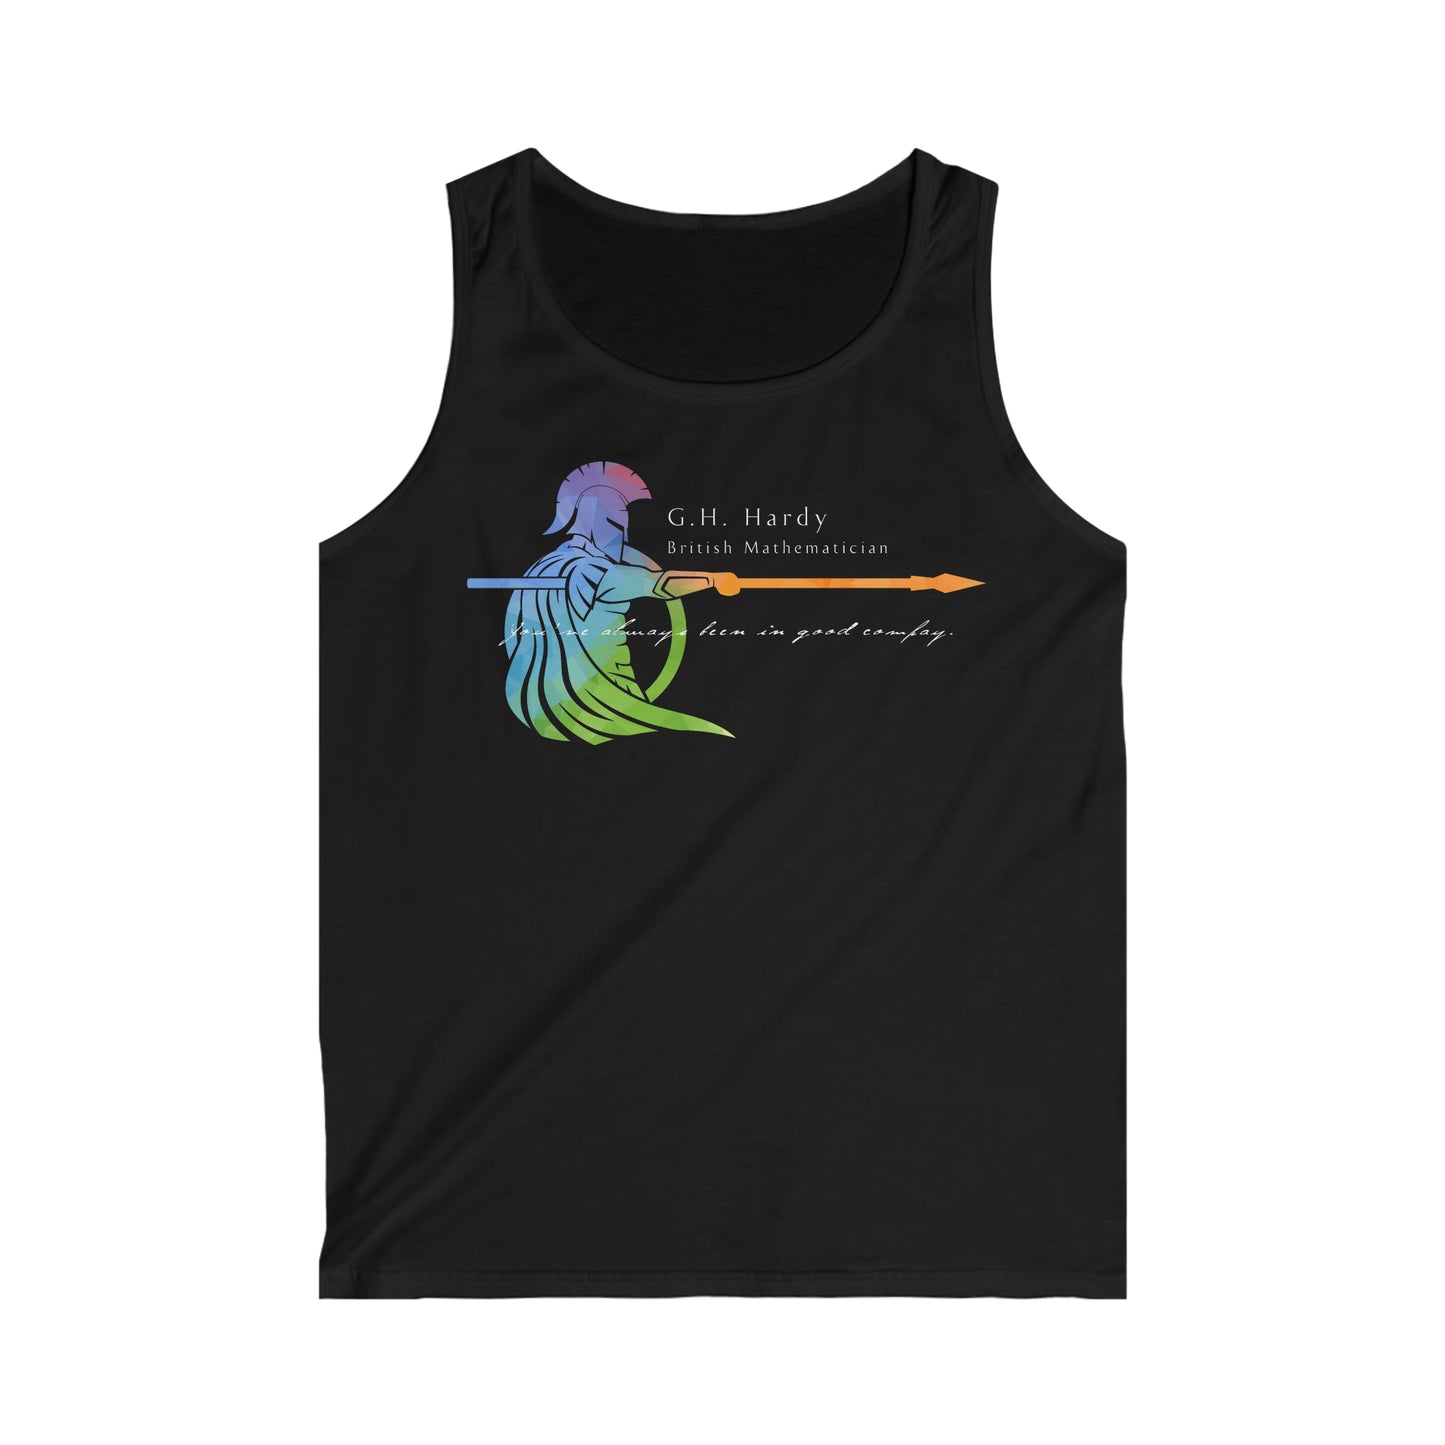 G.H. Hardy | Biologist & Mathematician | Pride Jersey Tank Hardy–Weinberg Principle Gay LGBT Queer